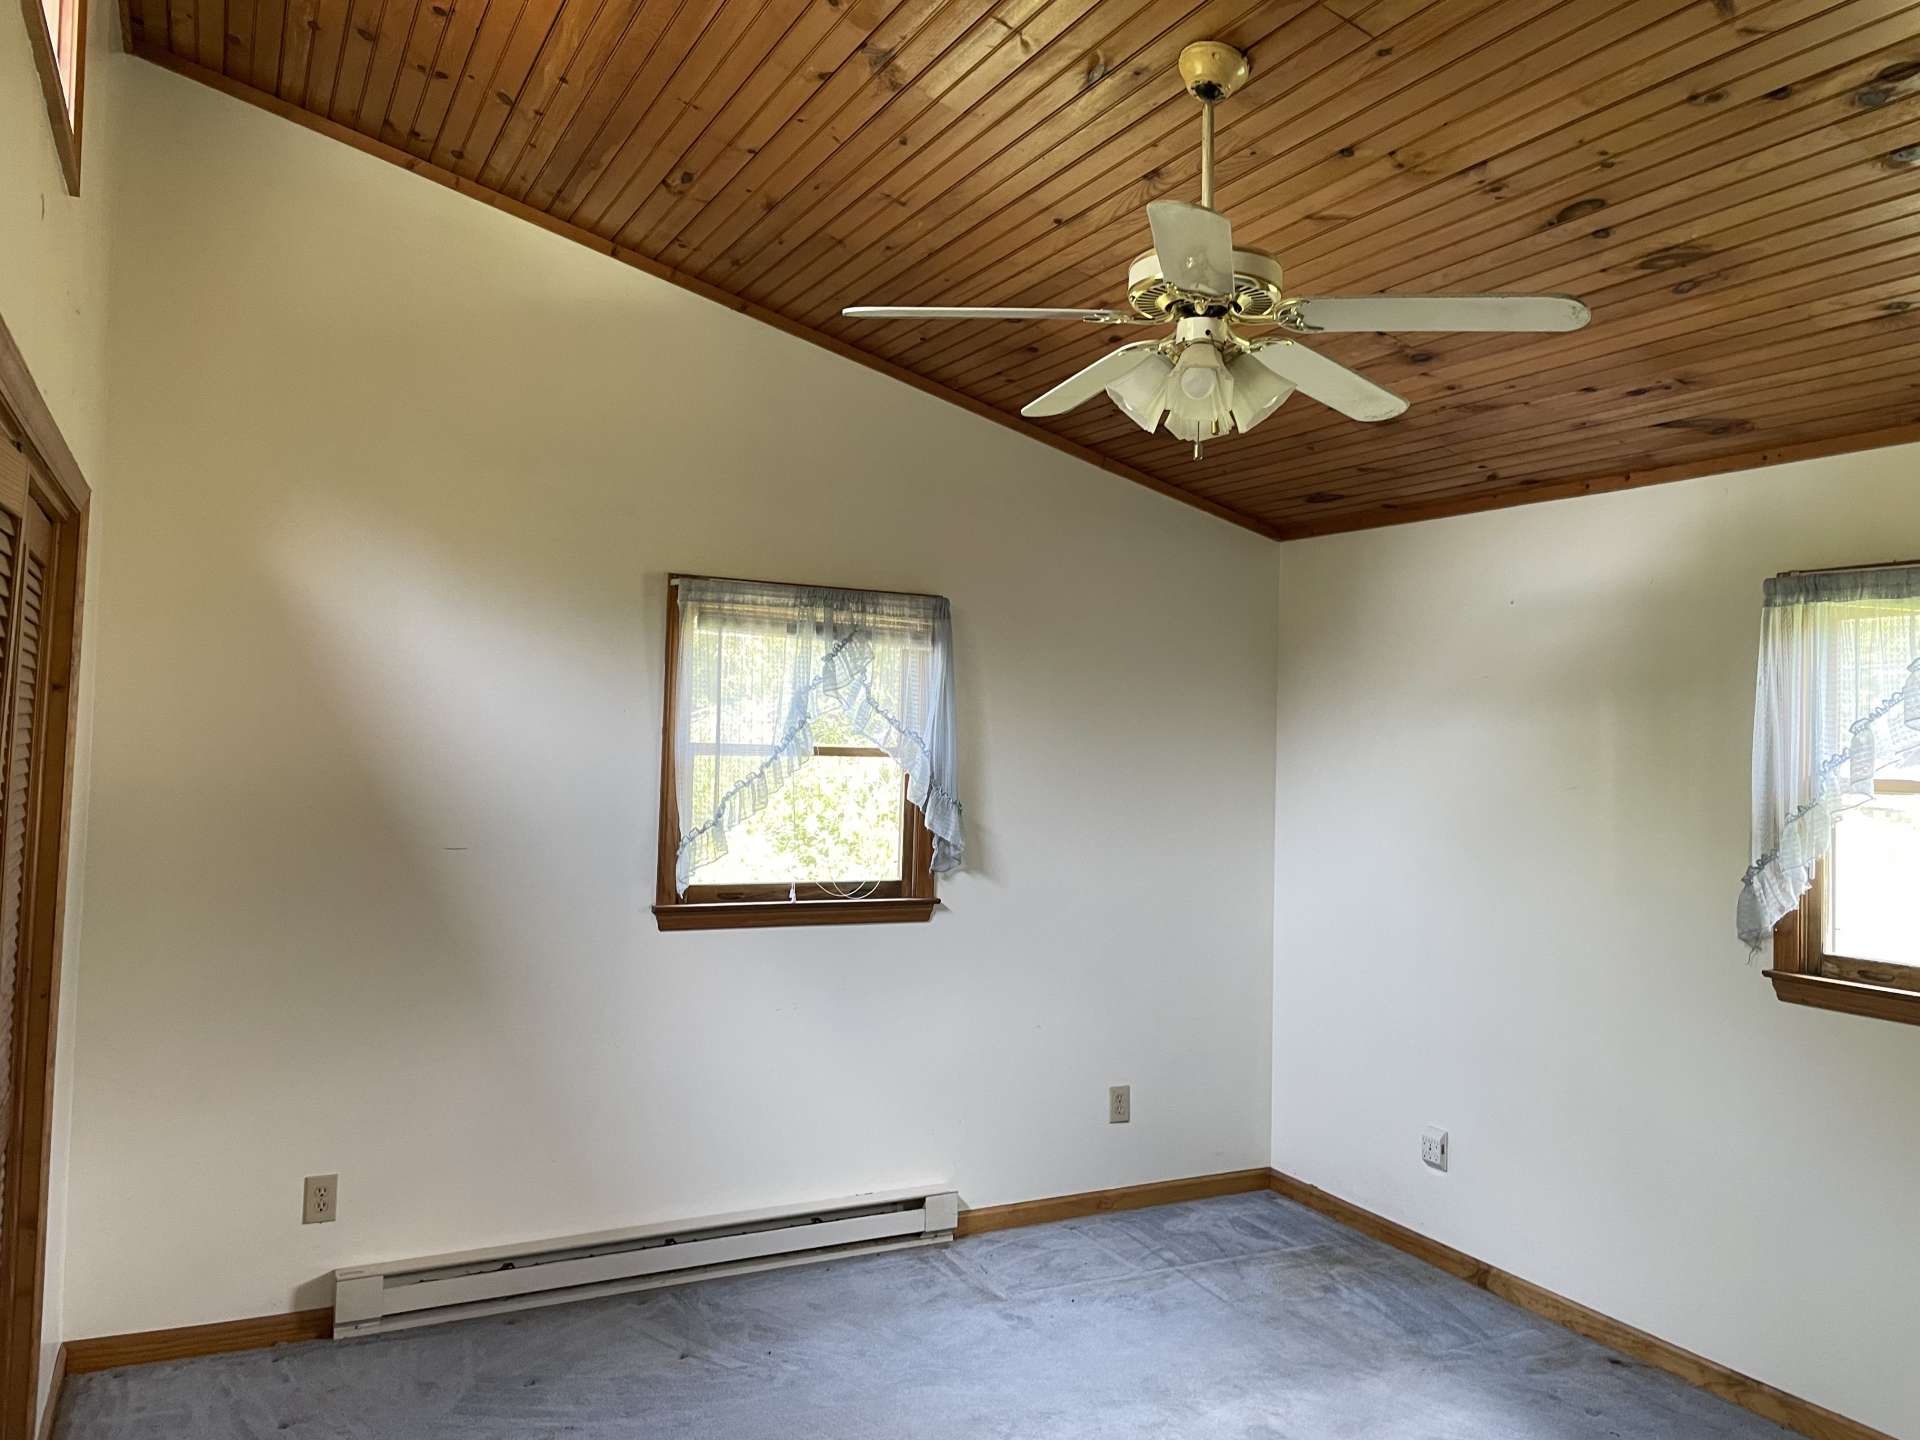 Upstairs bedroom #2 with vaulted ceiling